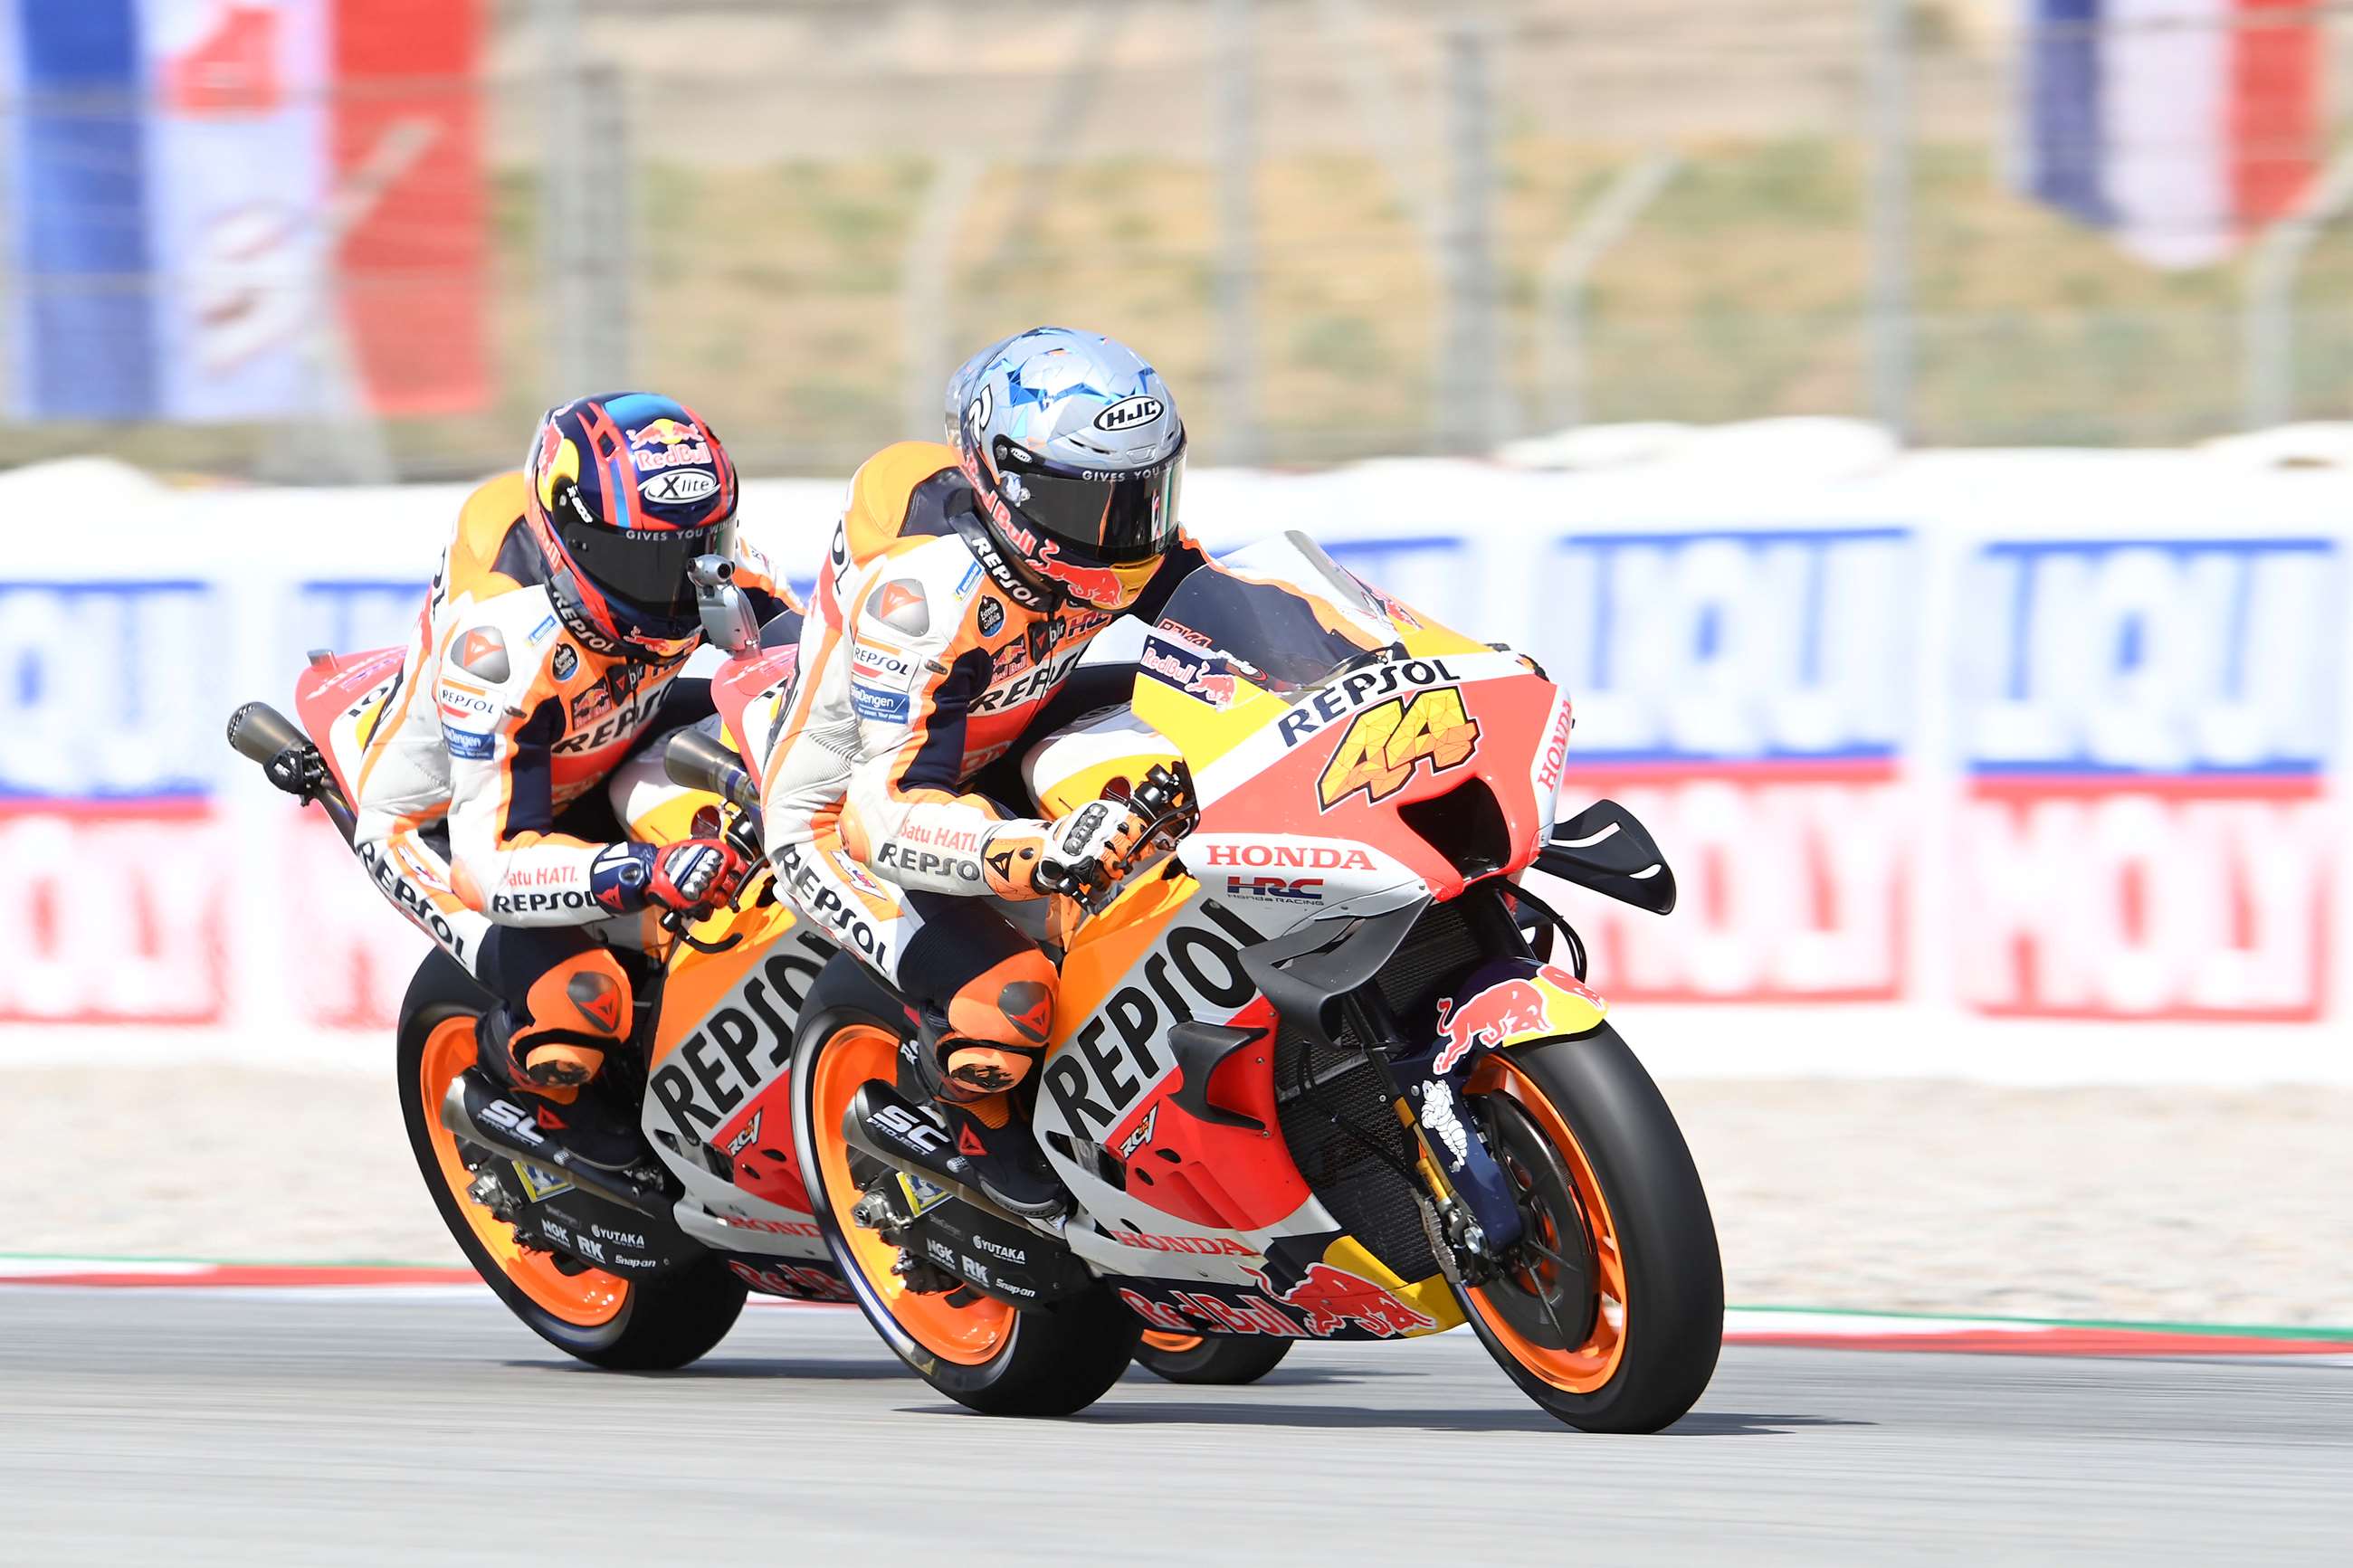 Hondas fall from grace in MotoGP is self-inflicted GRR